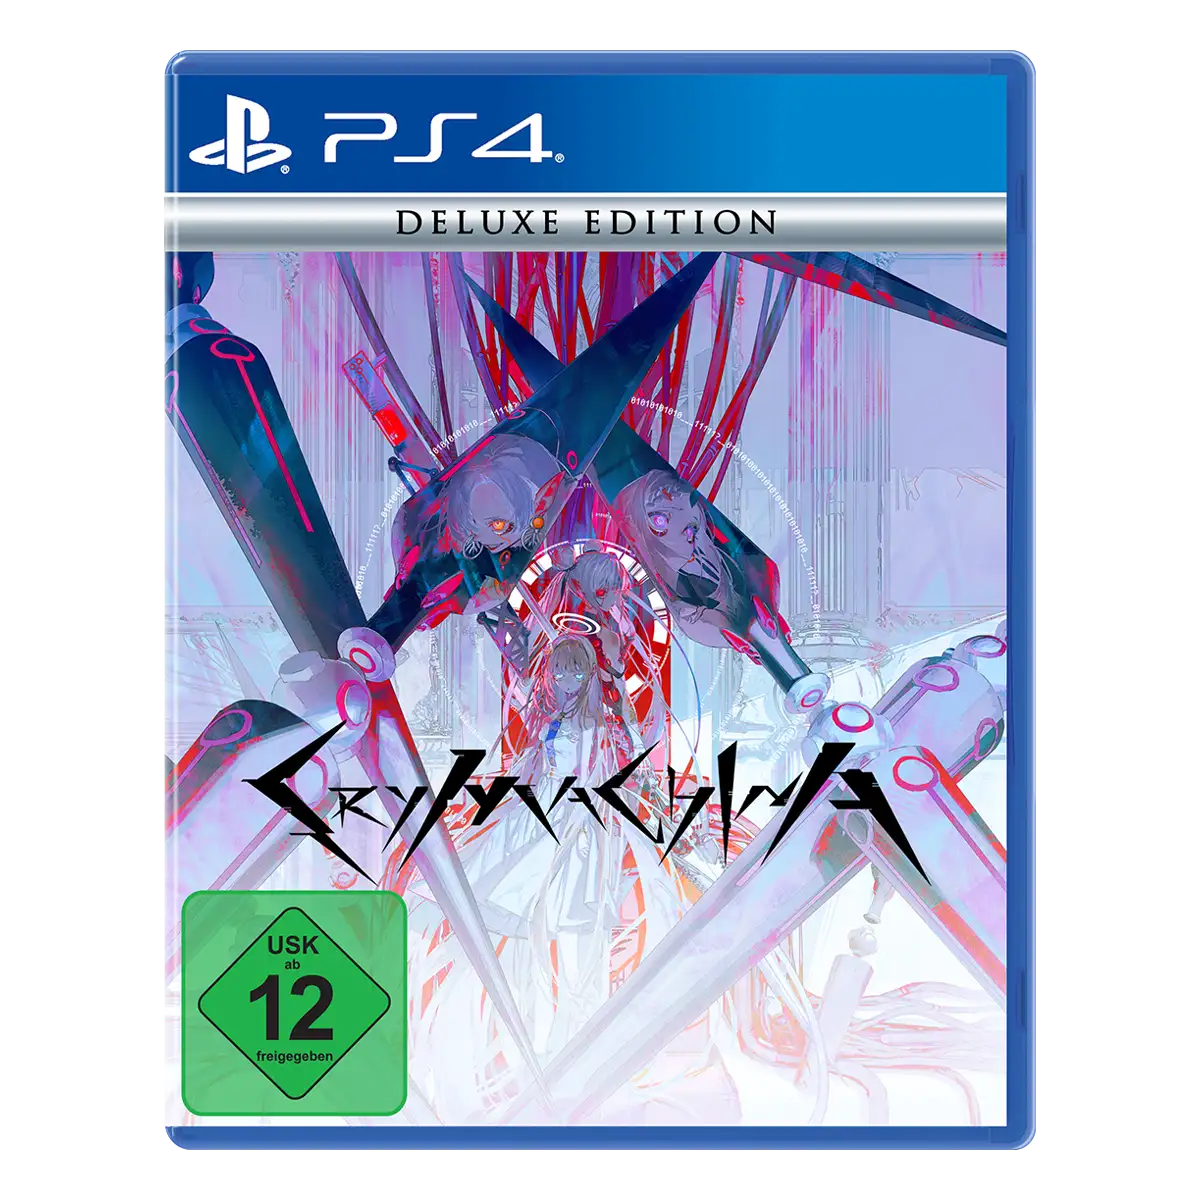 CRYMACHINA - Deluxe Edition (PS4)